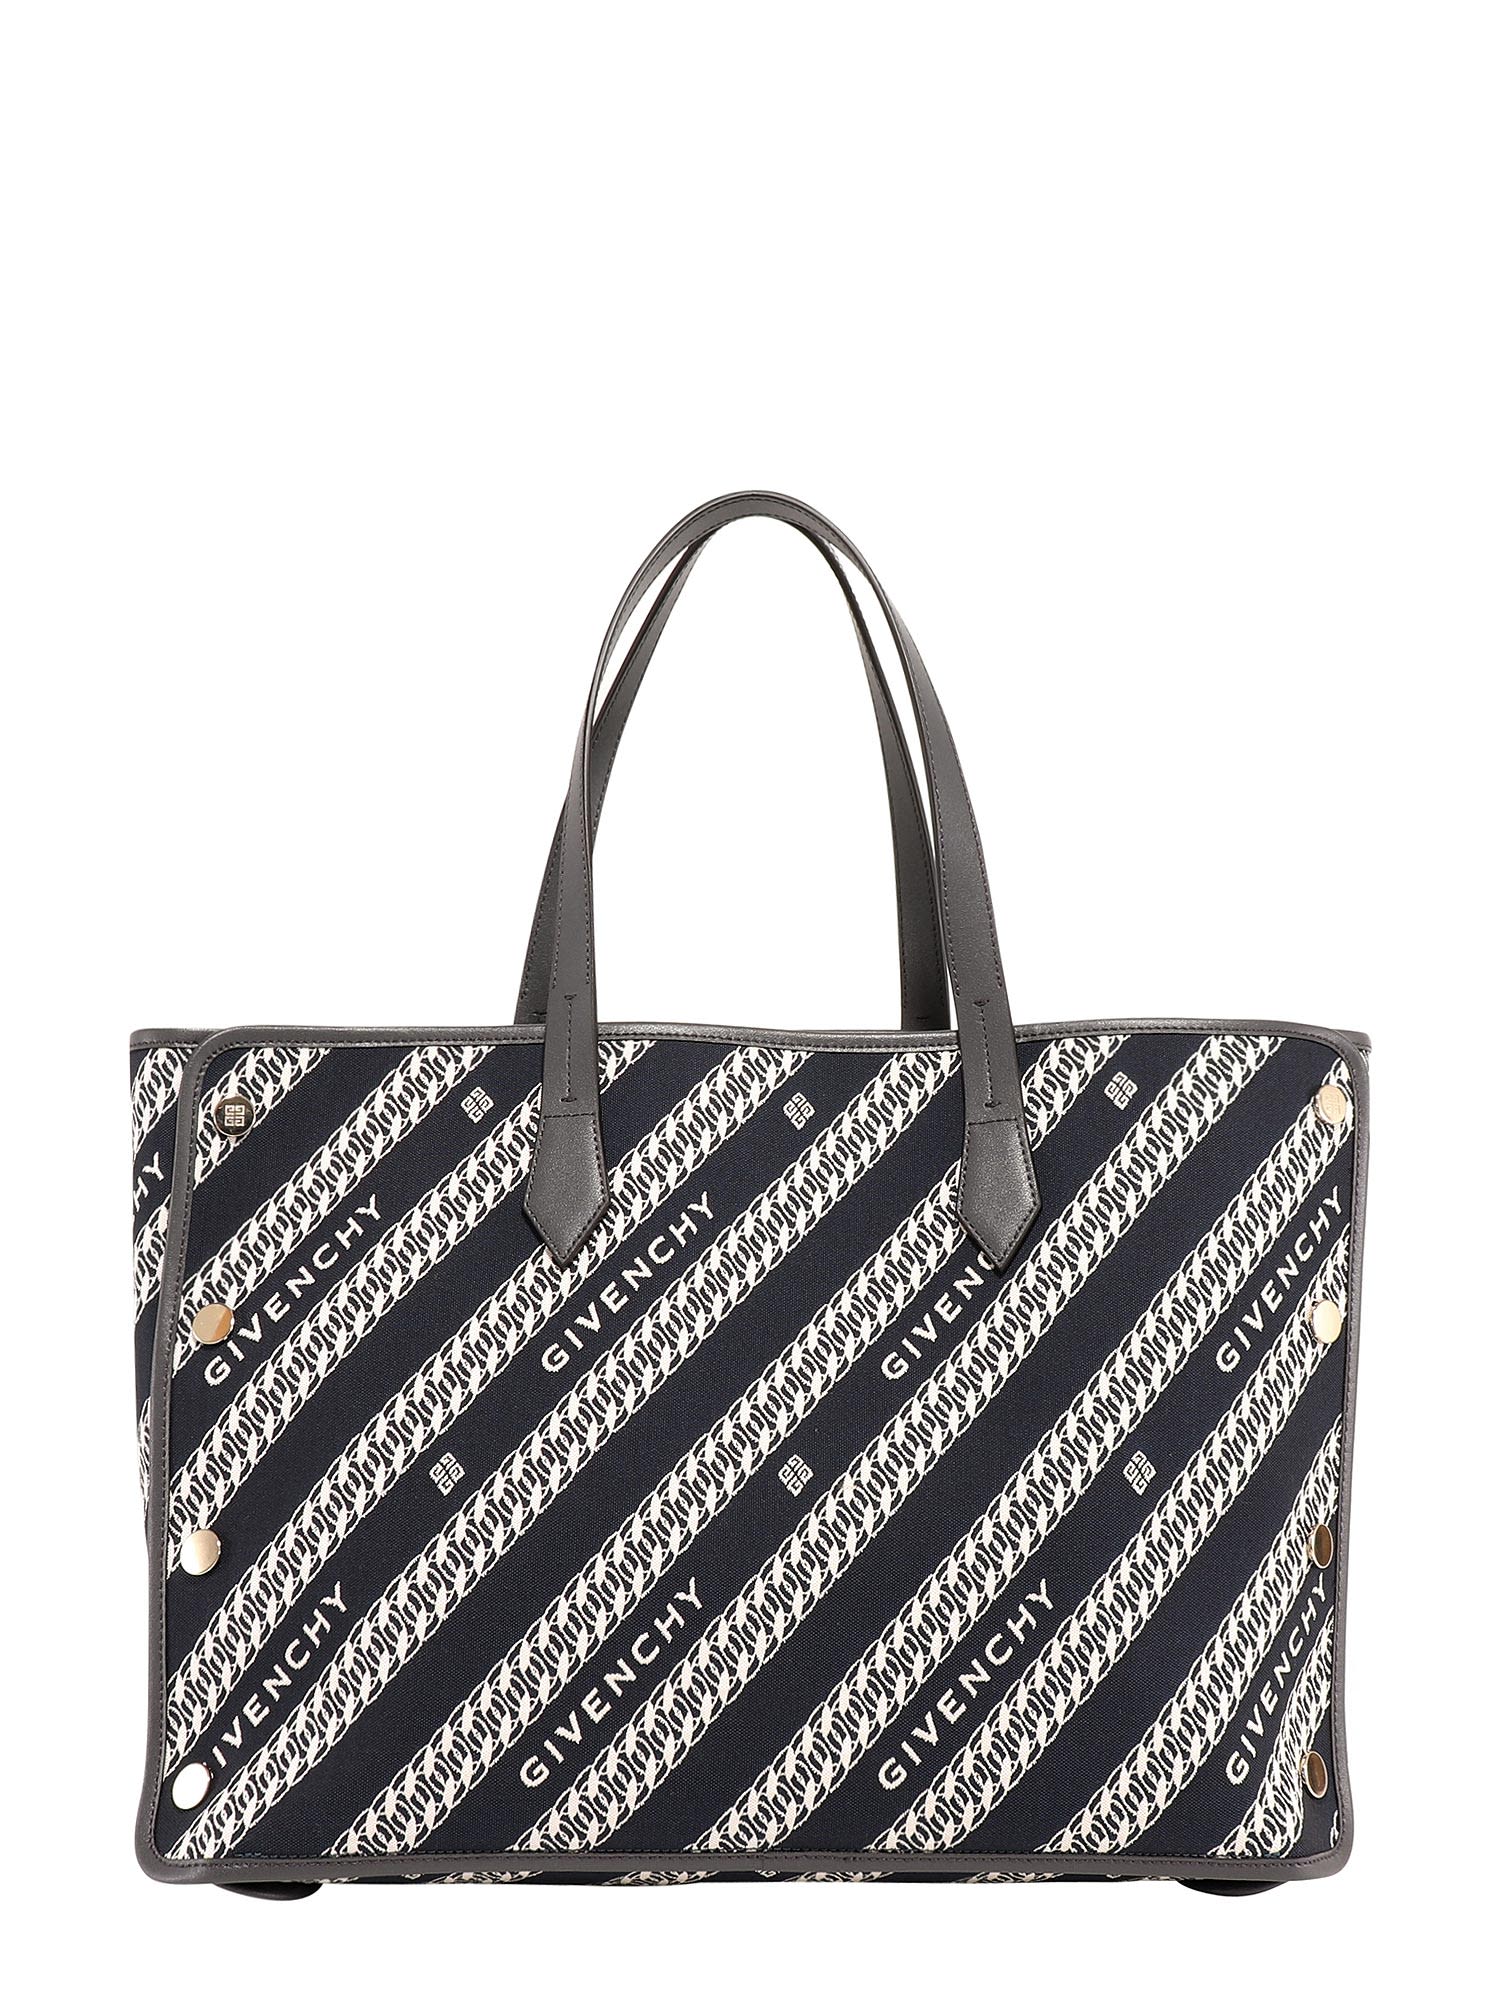 Givenchy Totes | italist, ALWAYS LIKE A 